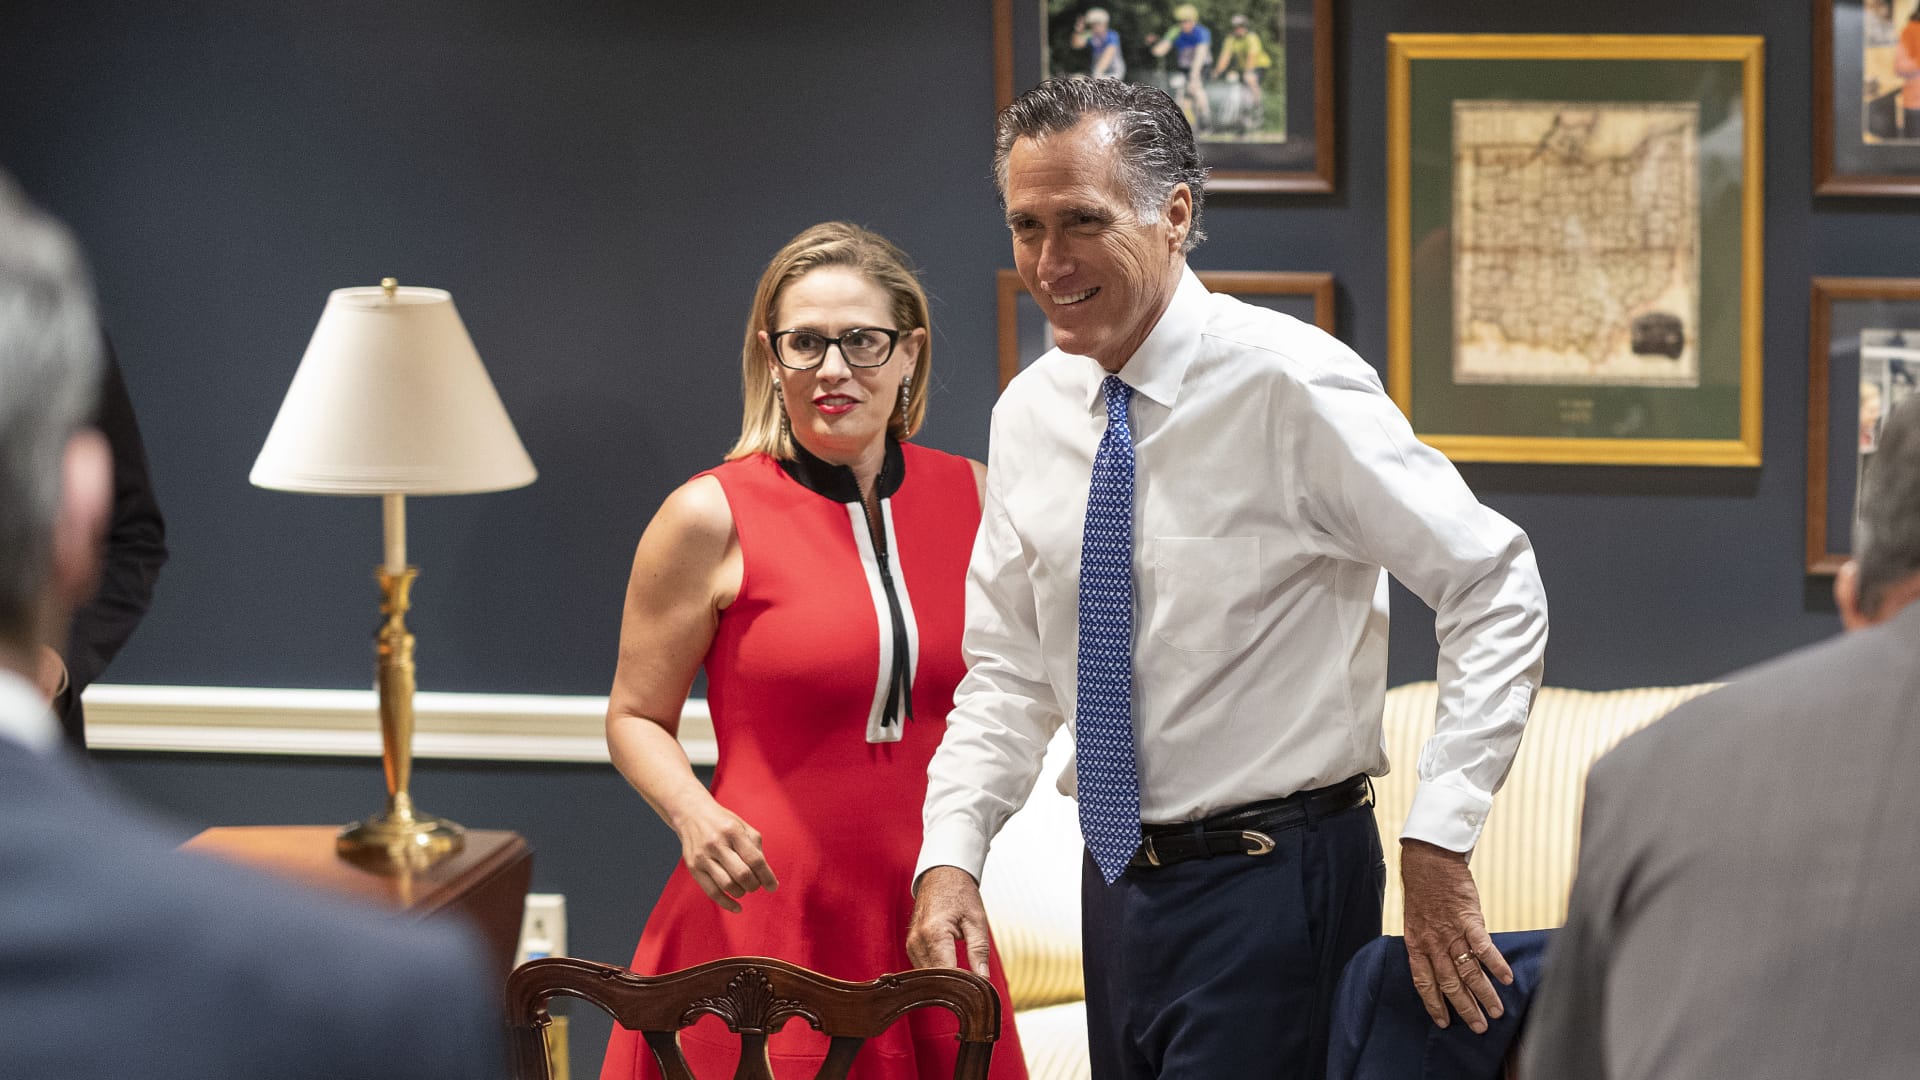 U.S. Sens. Kyrsten Sinema (D-AZ) (L) and Mitt Romney (R-UT) arrive for a bipartisan meeting on infrastructure after original talks fell through with the White House on June 08, 2021 in Washington, DC.